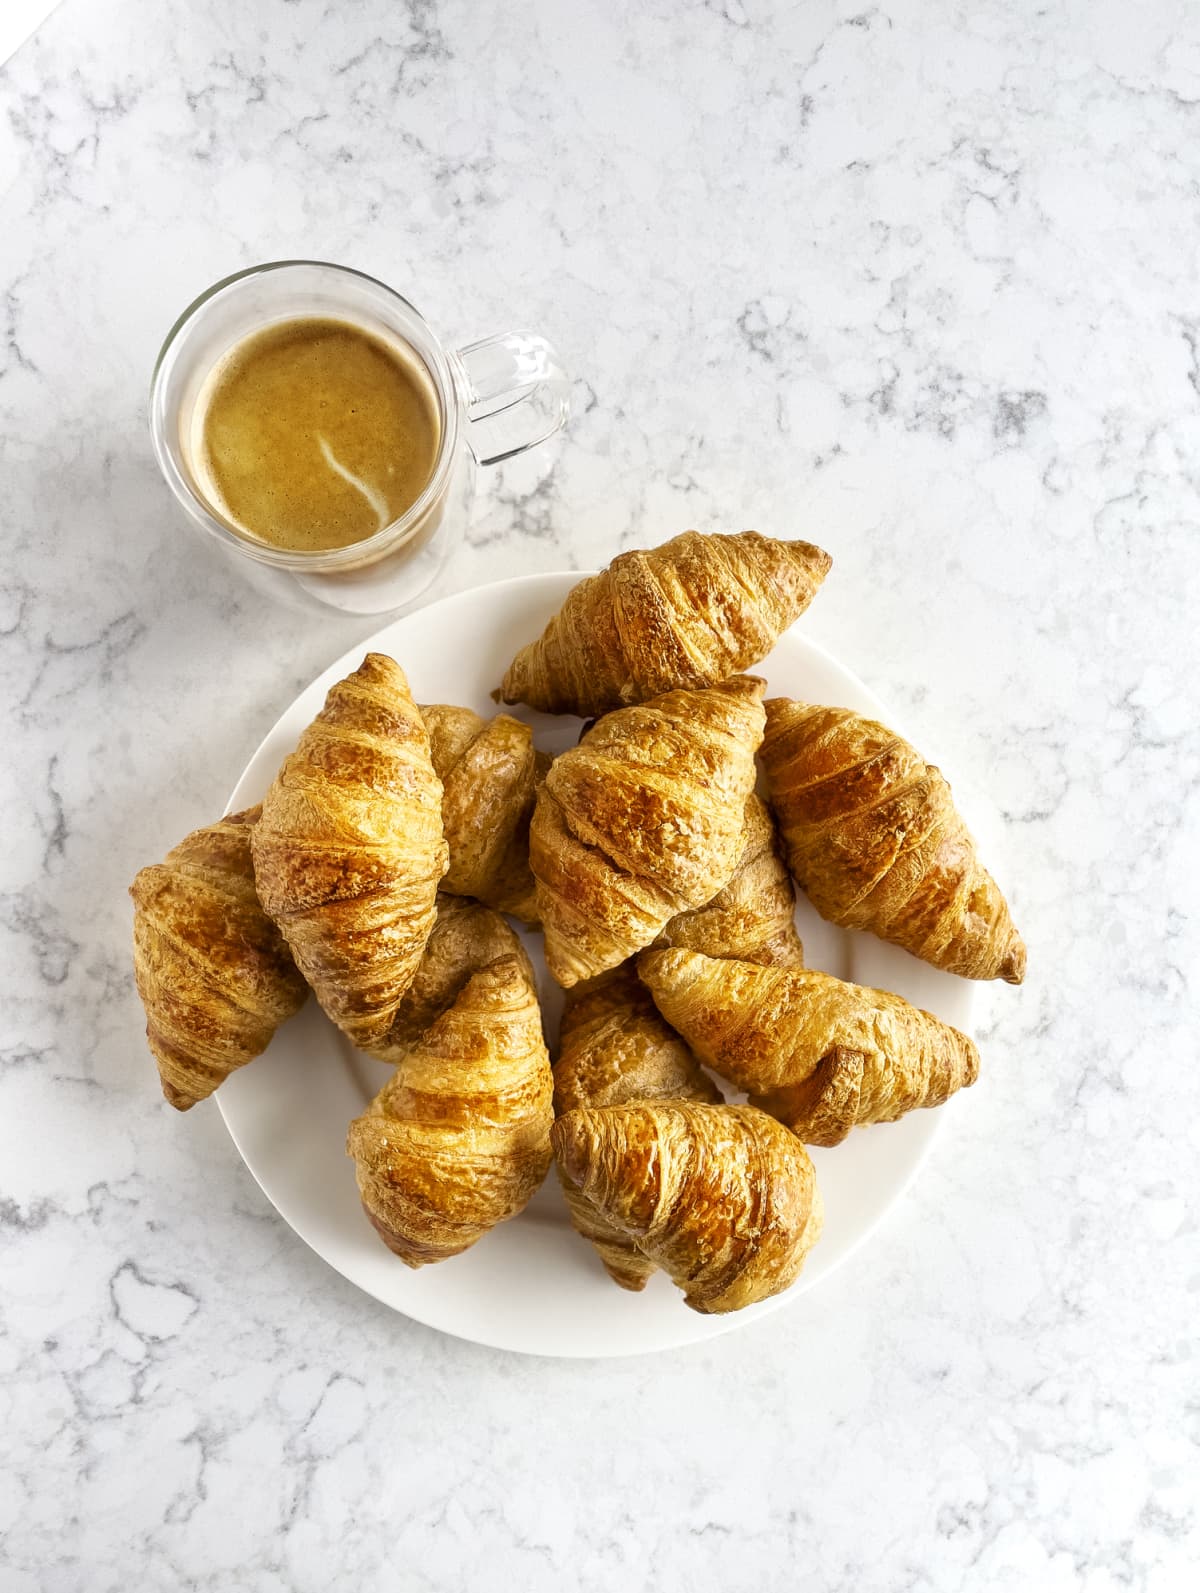 A cup of tea and a batch of croissants on a plate on top of a white marble counter.